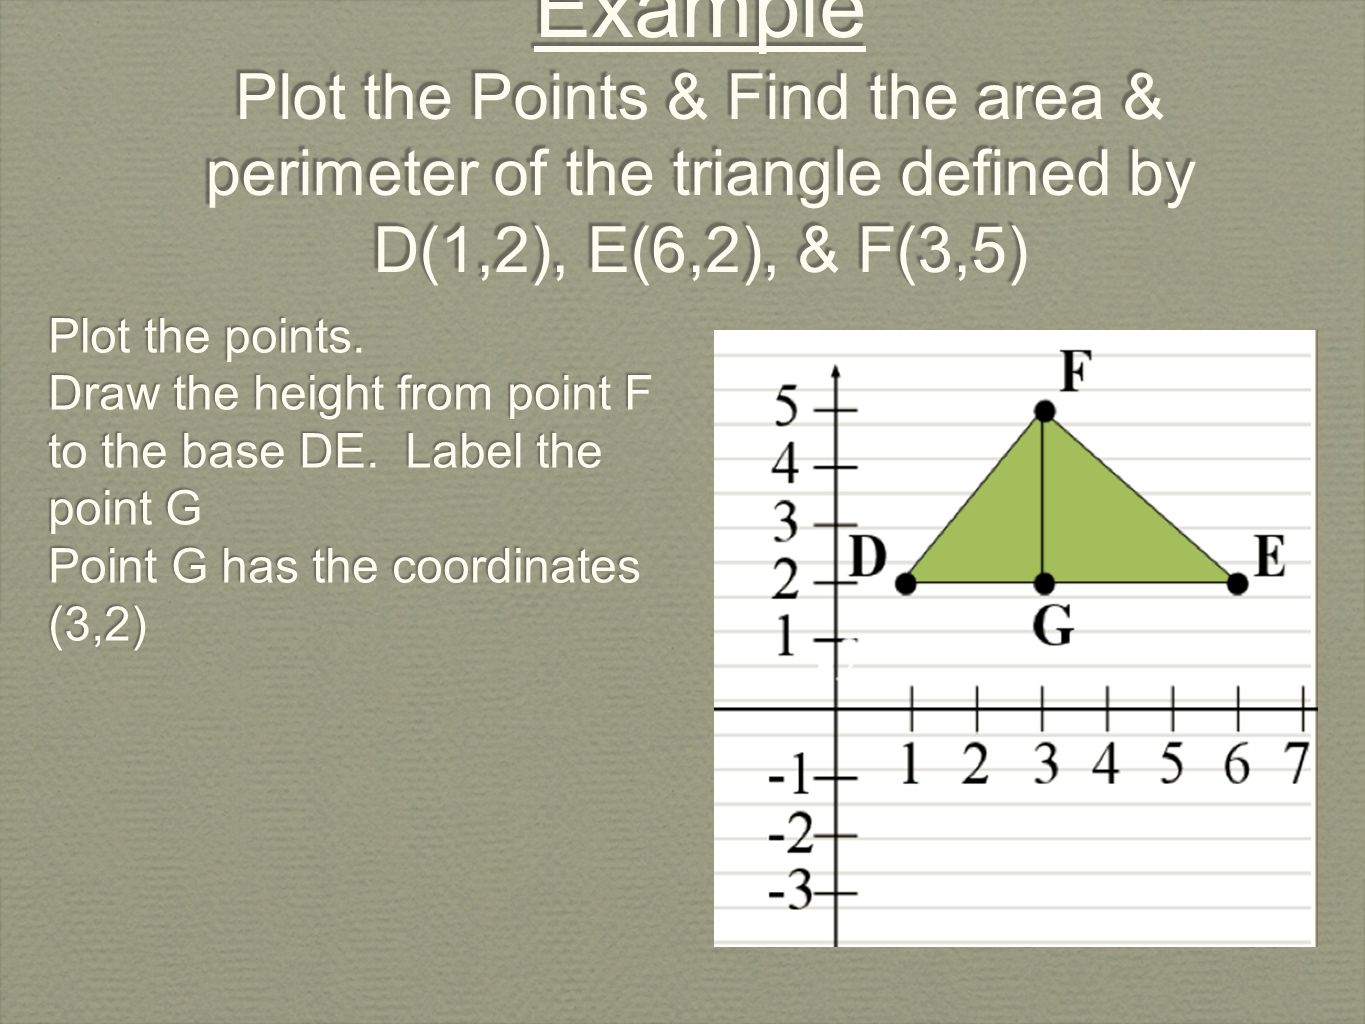 Example Plot the Points & Find the area & perimeter of the triangle defined by D(1,2), E(6,2), & F(3,5)